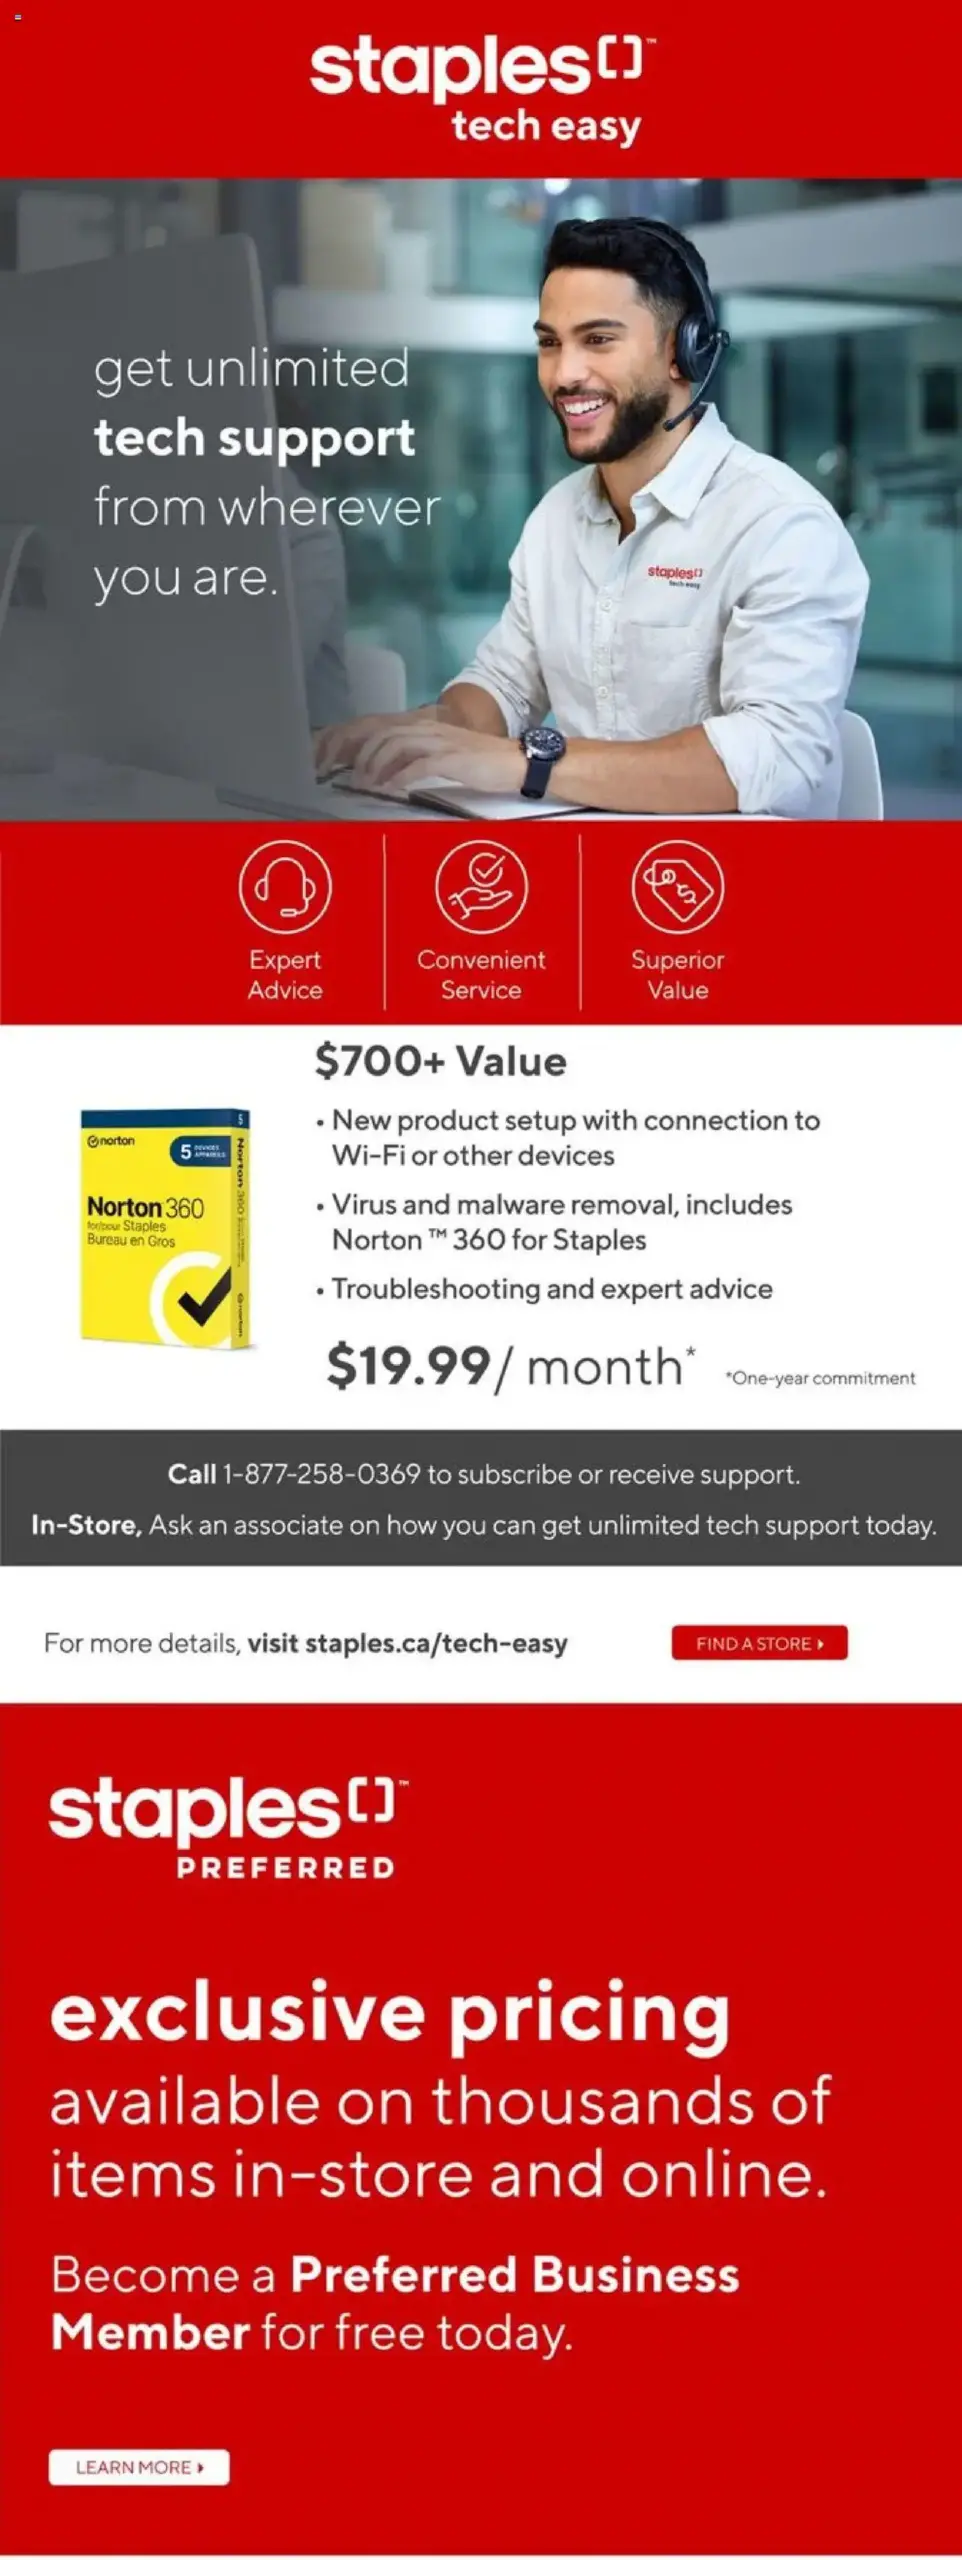 staples flyer july 3 9 27 scaled